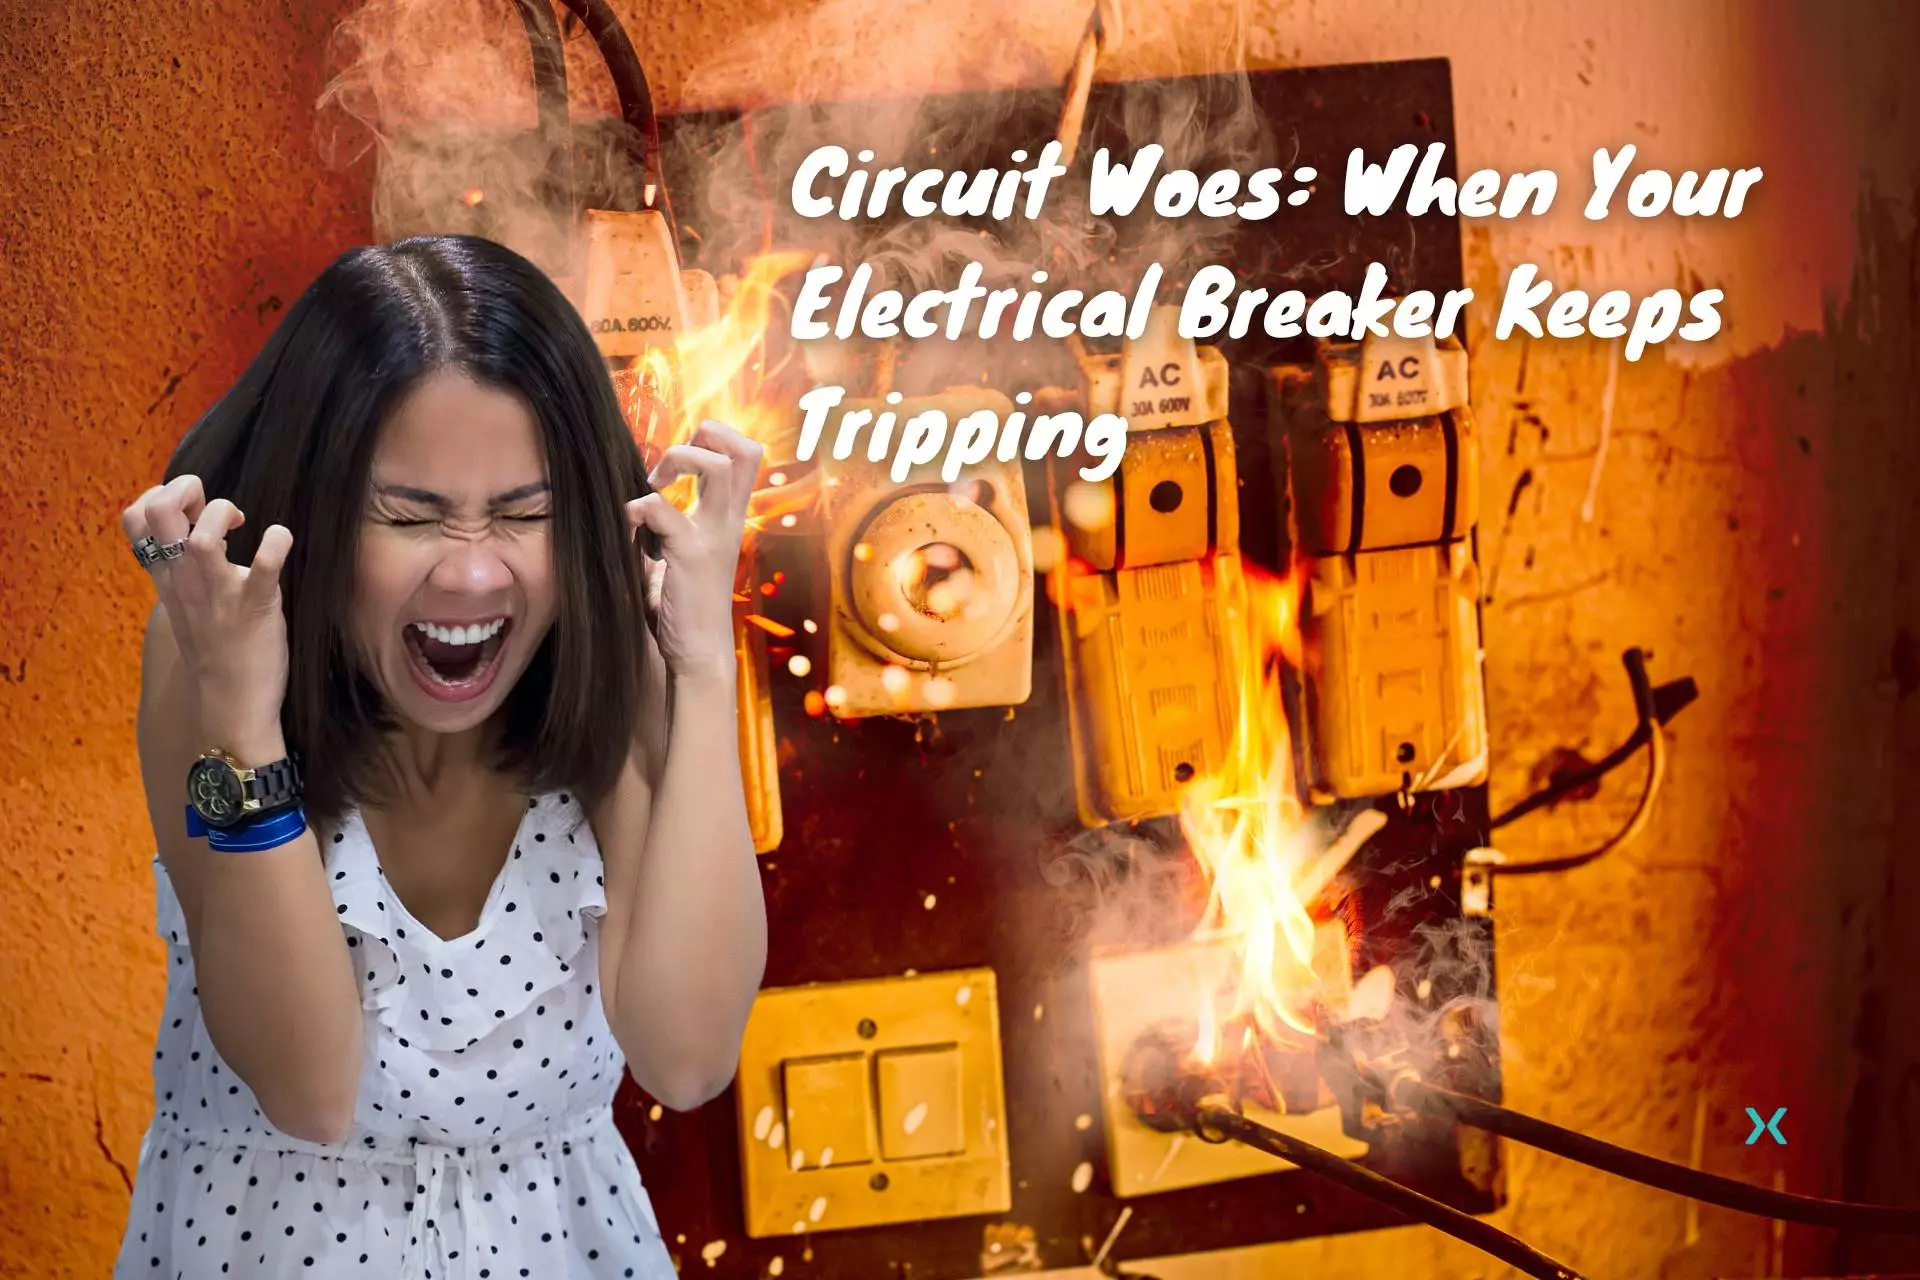 Circuit Woes When Your Electrical Breaker Keeps Tripping